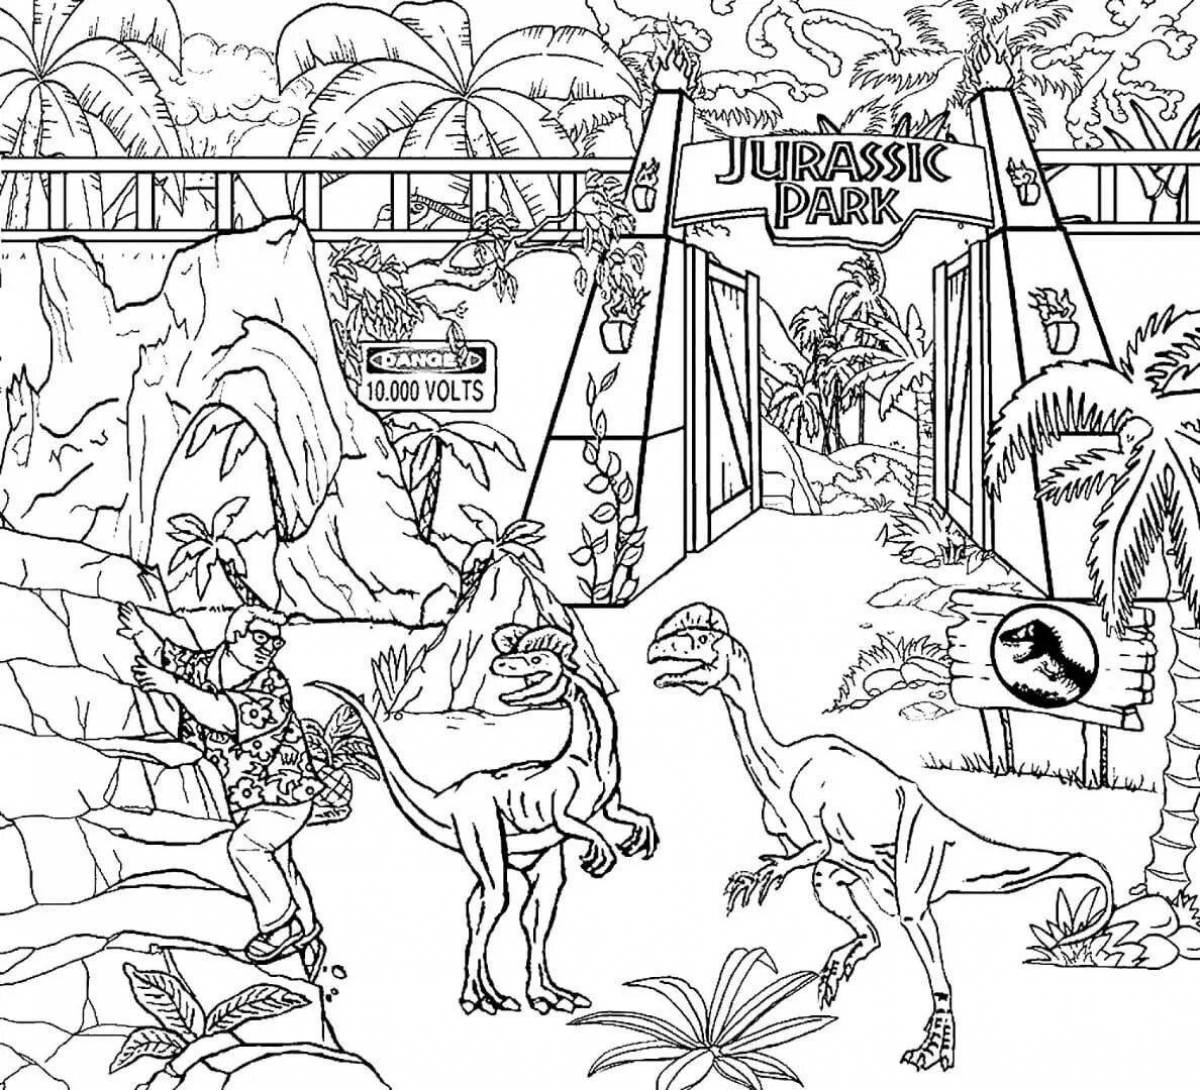 Coloring book cheerful world of dinosaurs